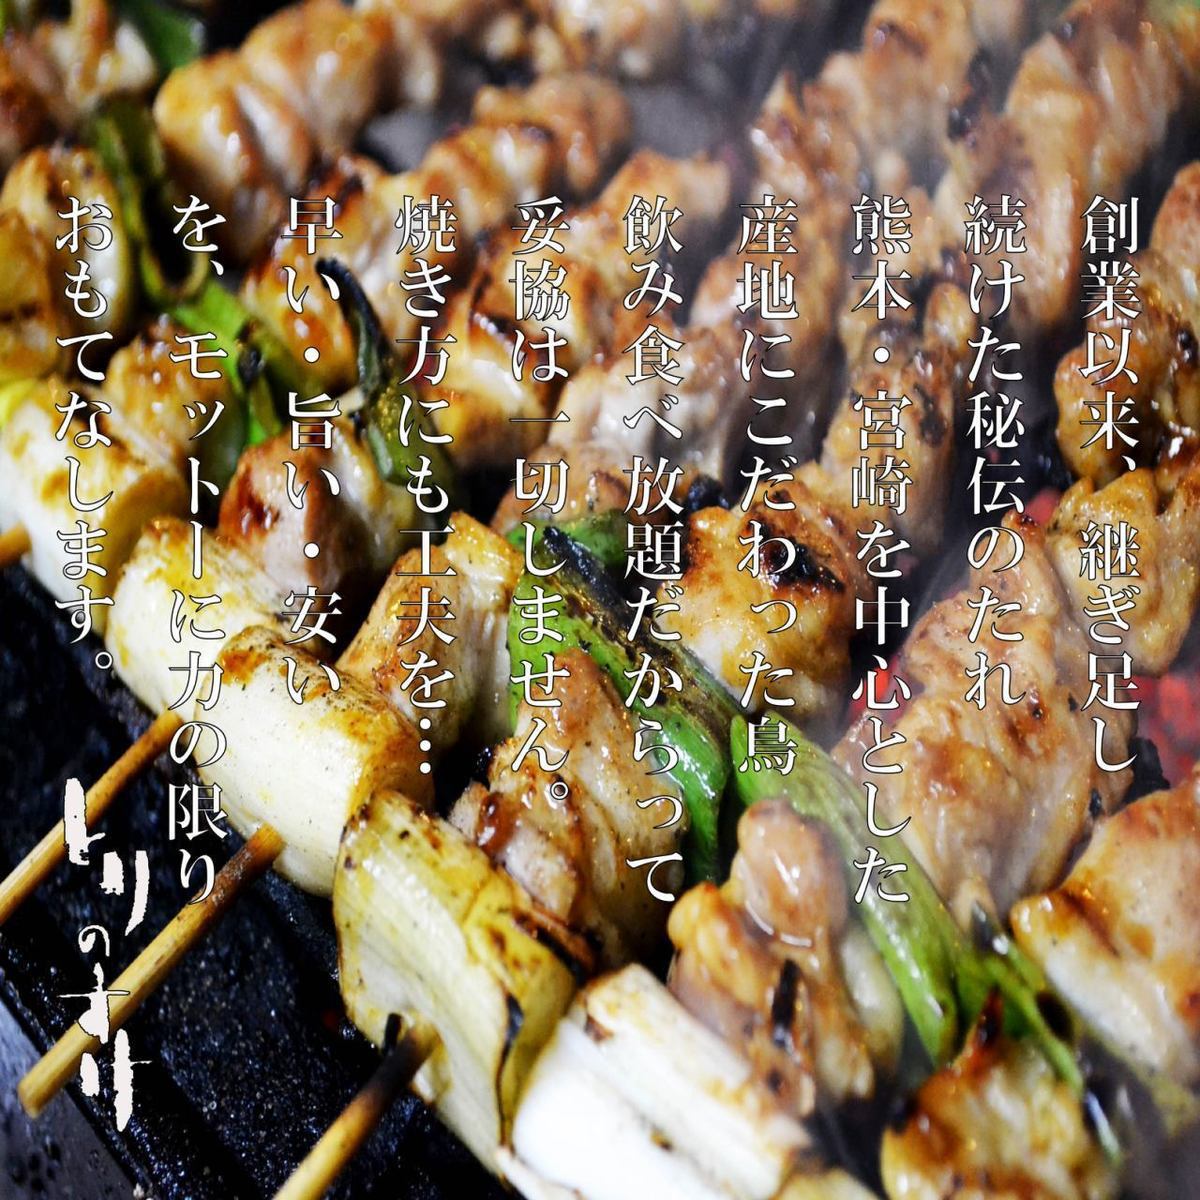 All-you-can-eat yakitori! Course starts from 3,600 yen♪ We are confident in the quality of our food!